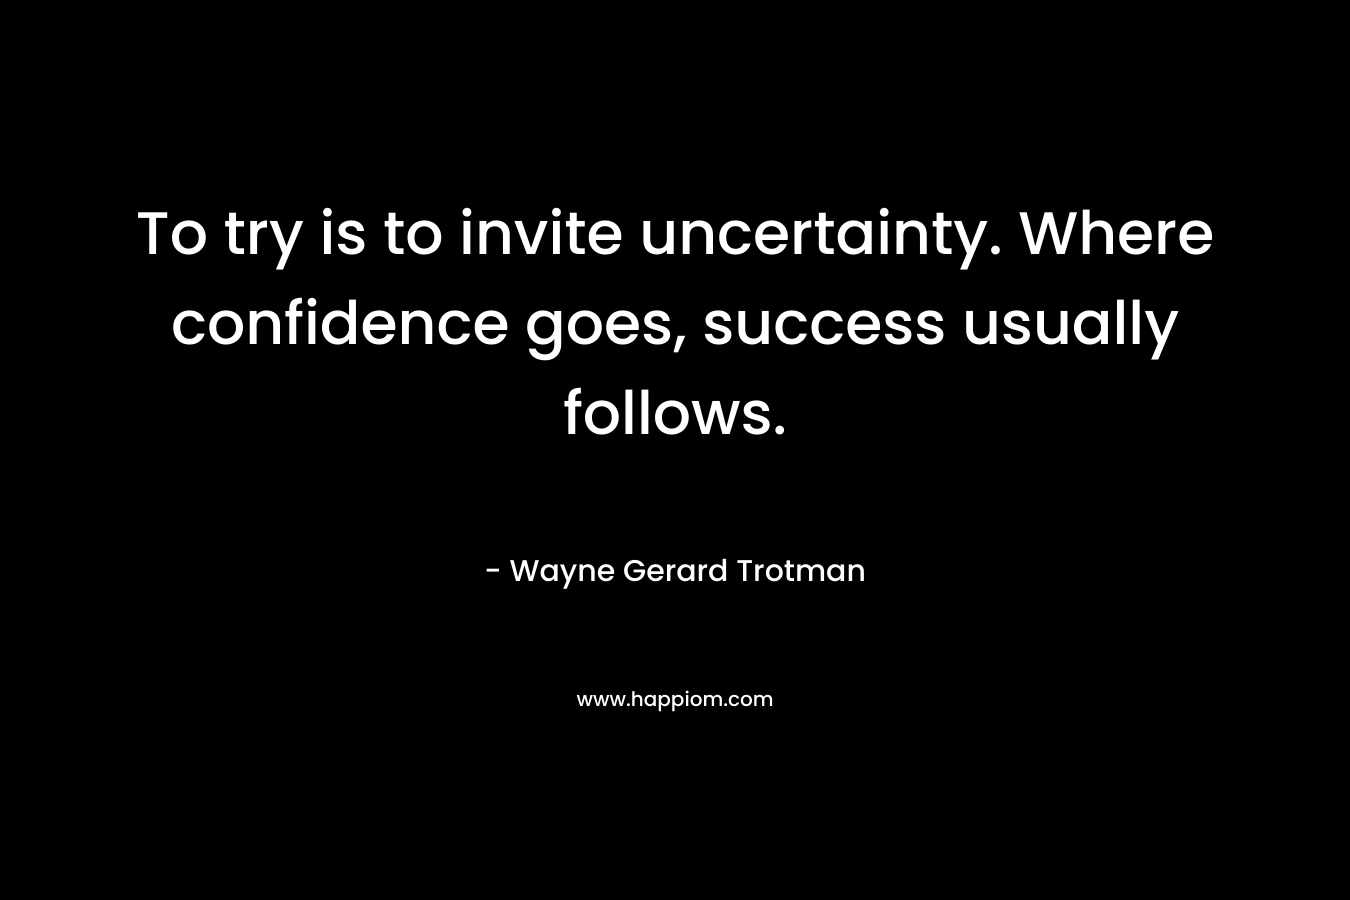 To try is to invite uncertainty. Where confidence goes, success usually follows.